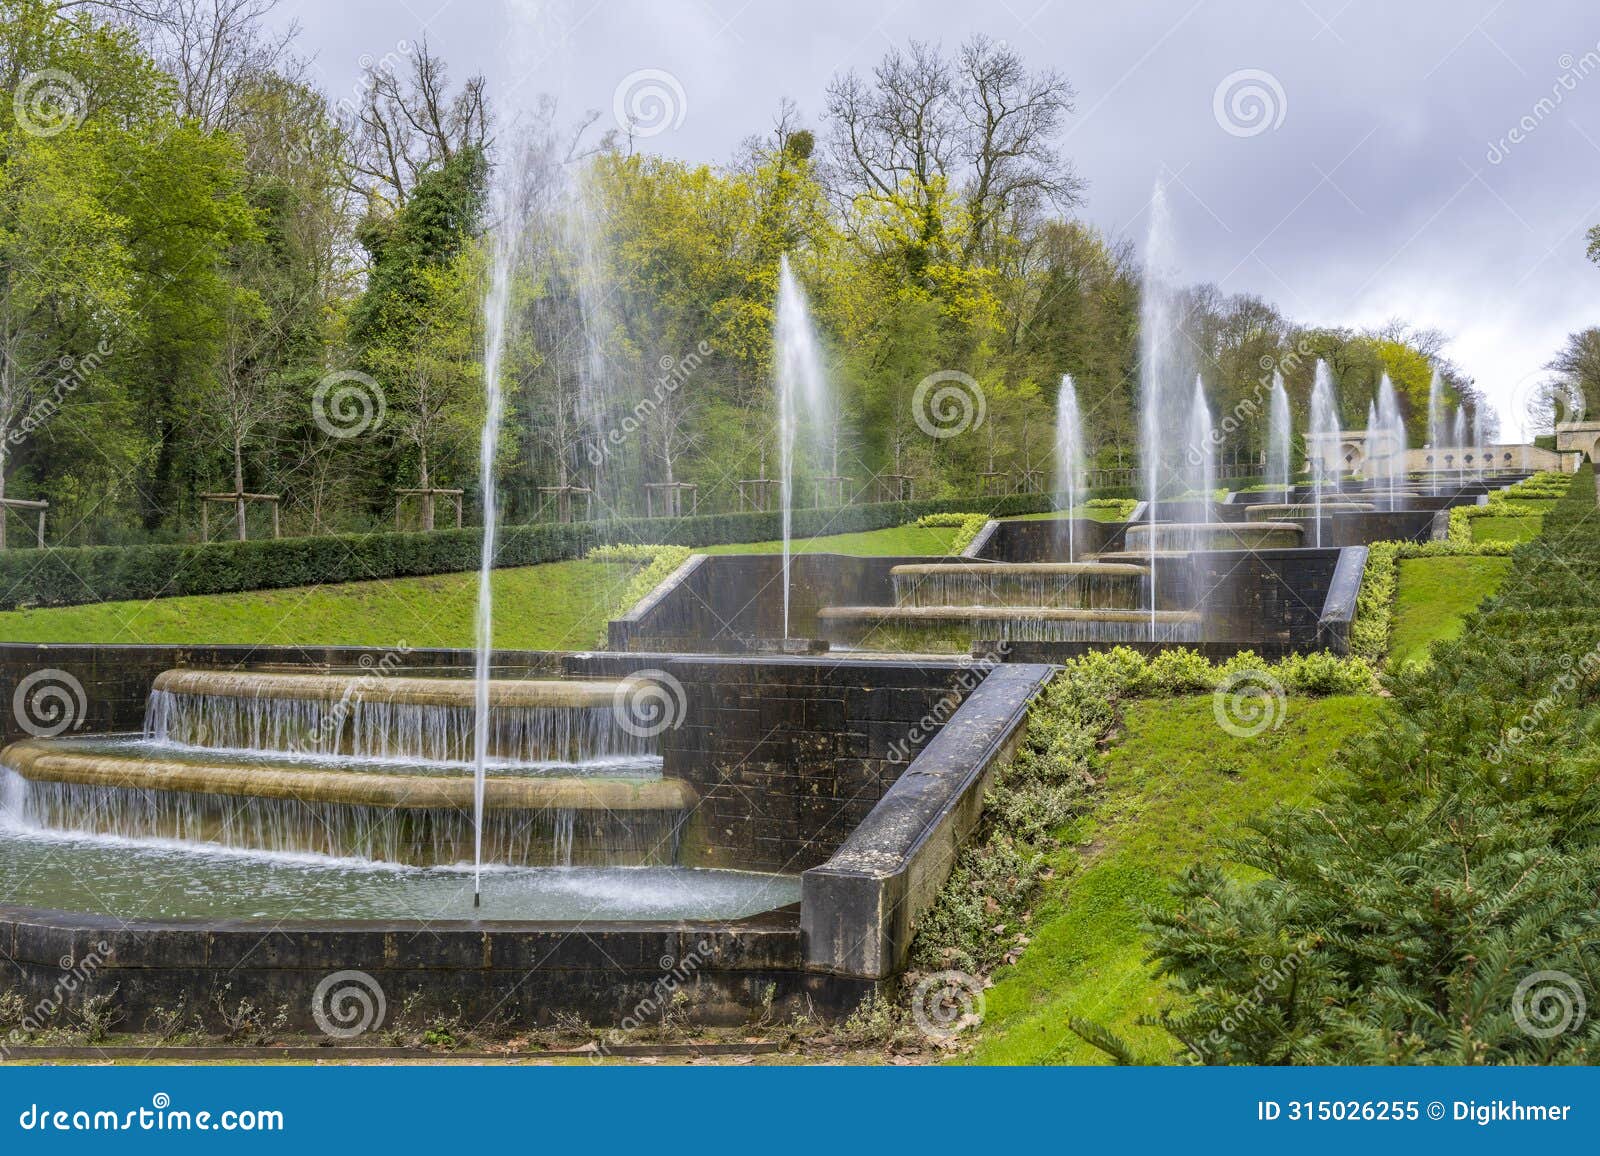 fountain of the 'parc de sceaux' located in the south of paris